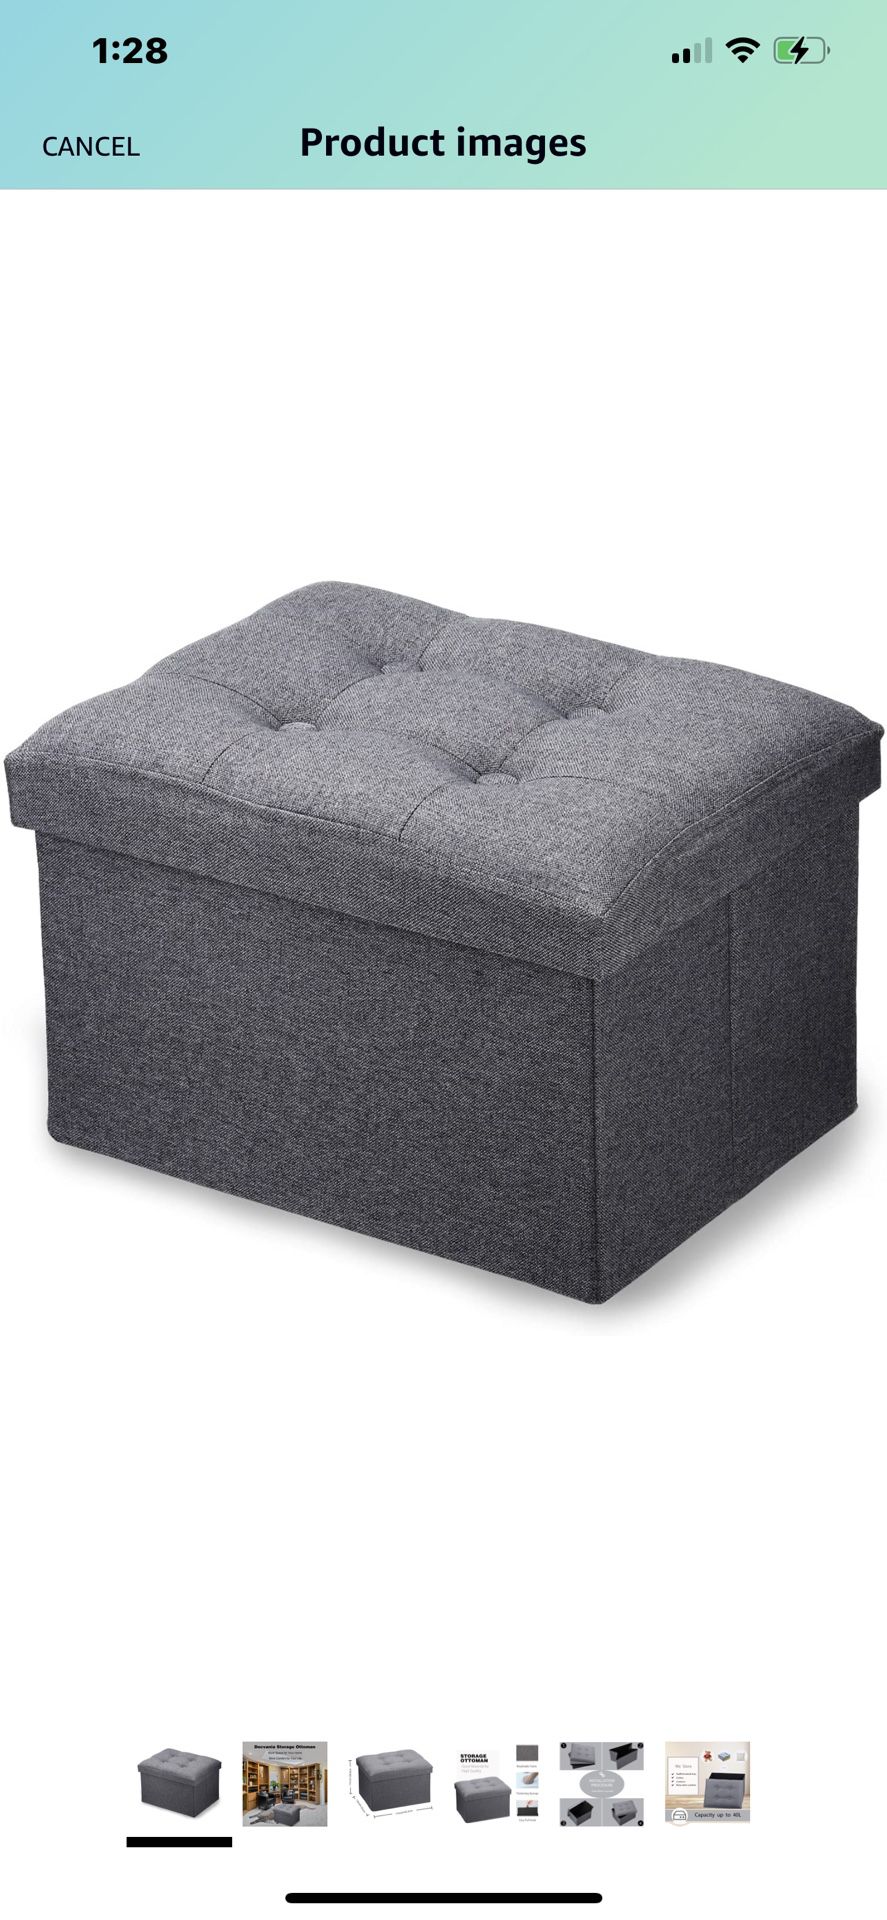 Small Storage Ottoman Foot Rest Stool Short Ottoman Foot Stools Foldable Footrest Linen Fabric Folding Storage Thicker Foam Rectangle Collapsible Benc